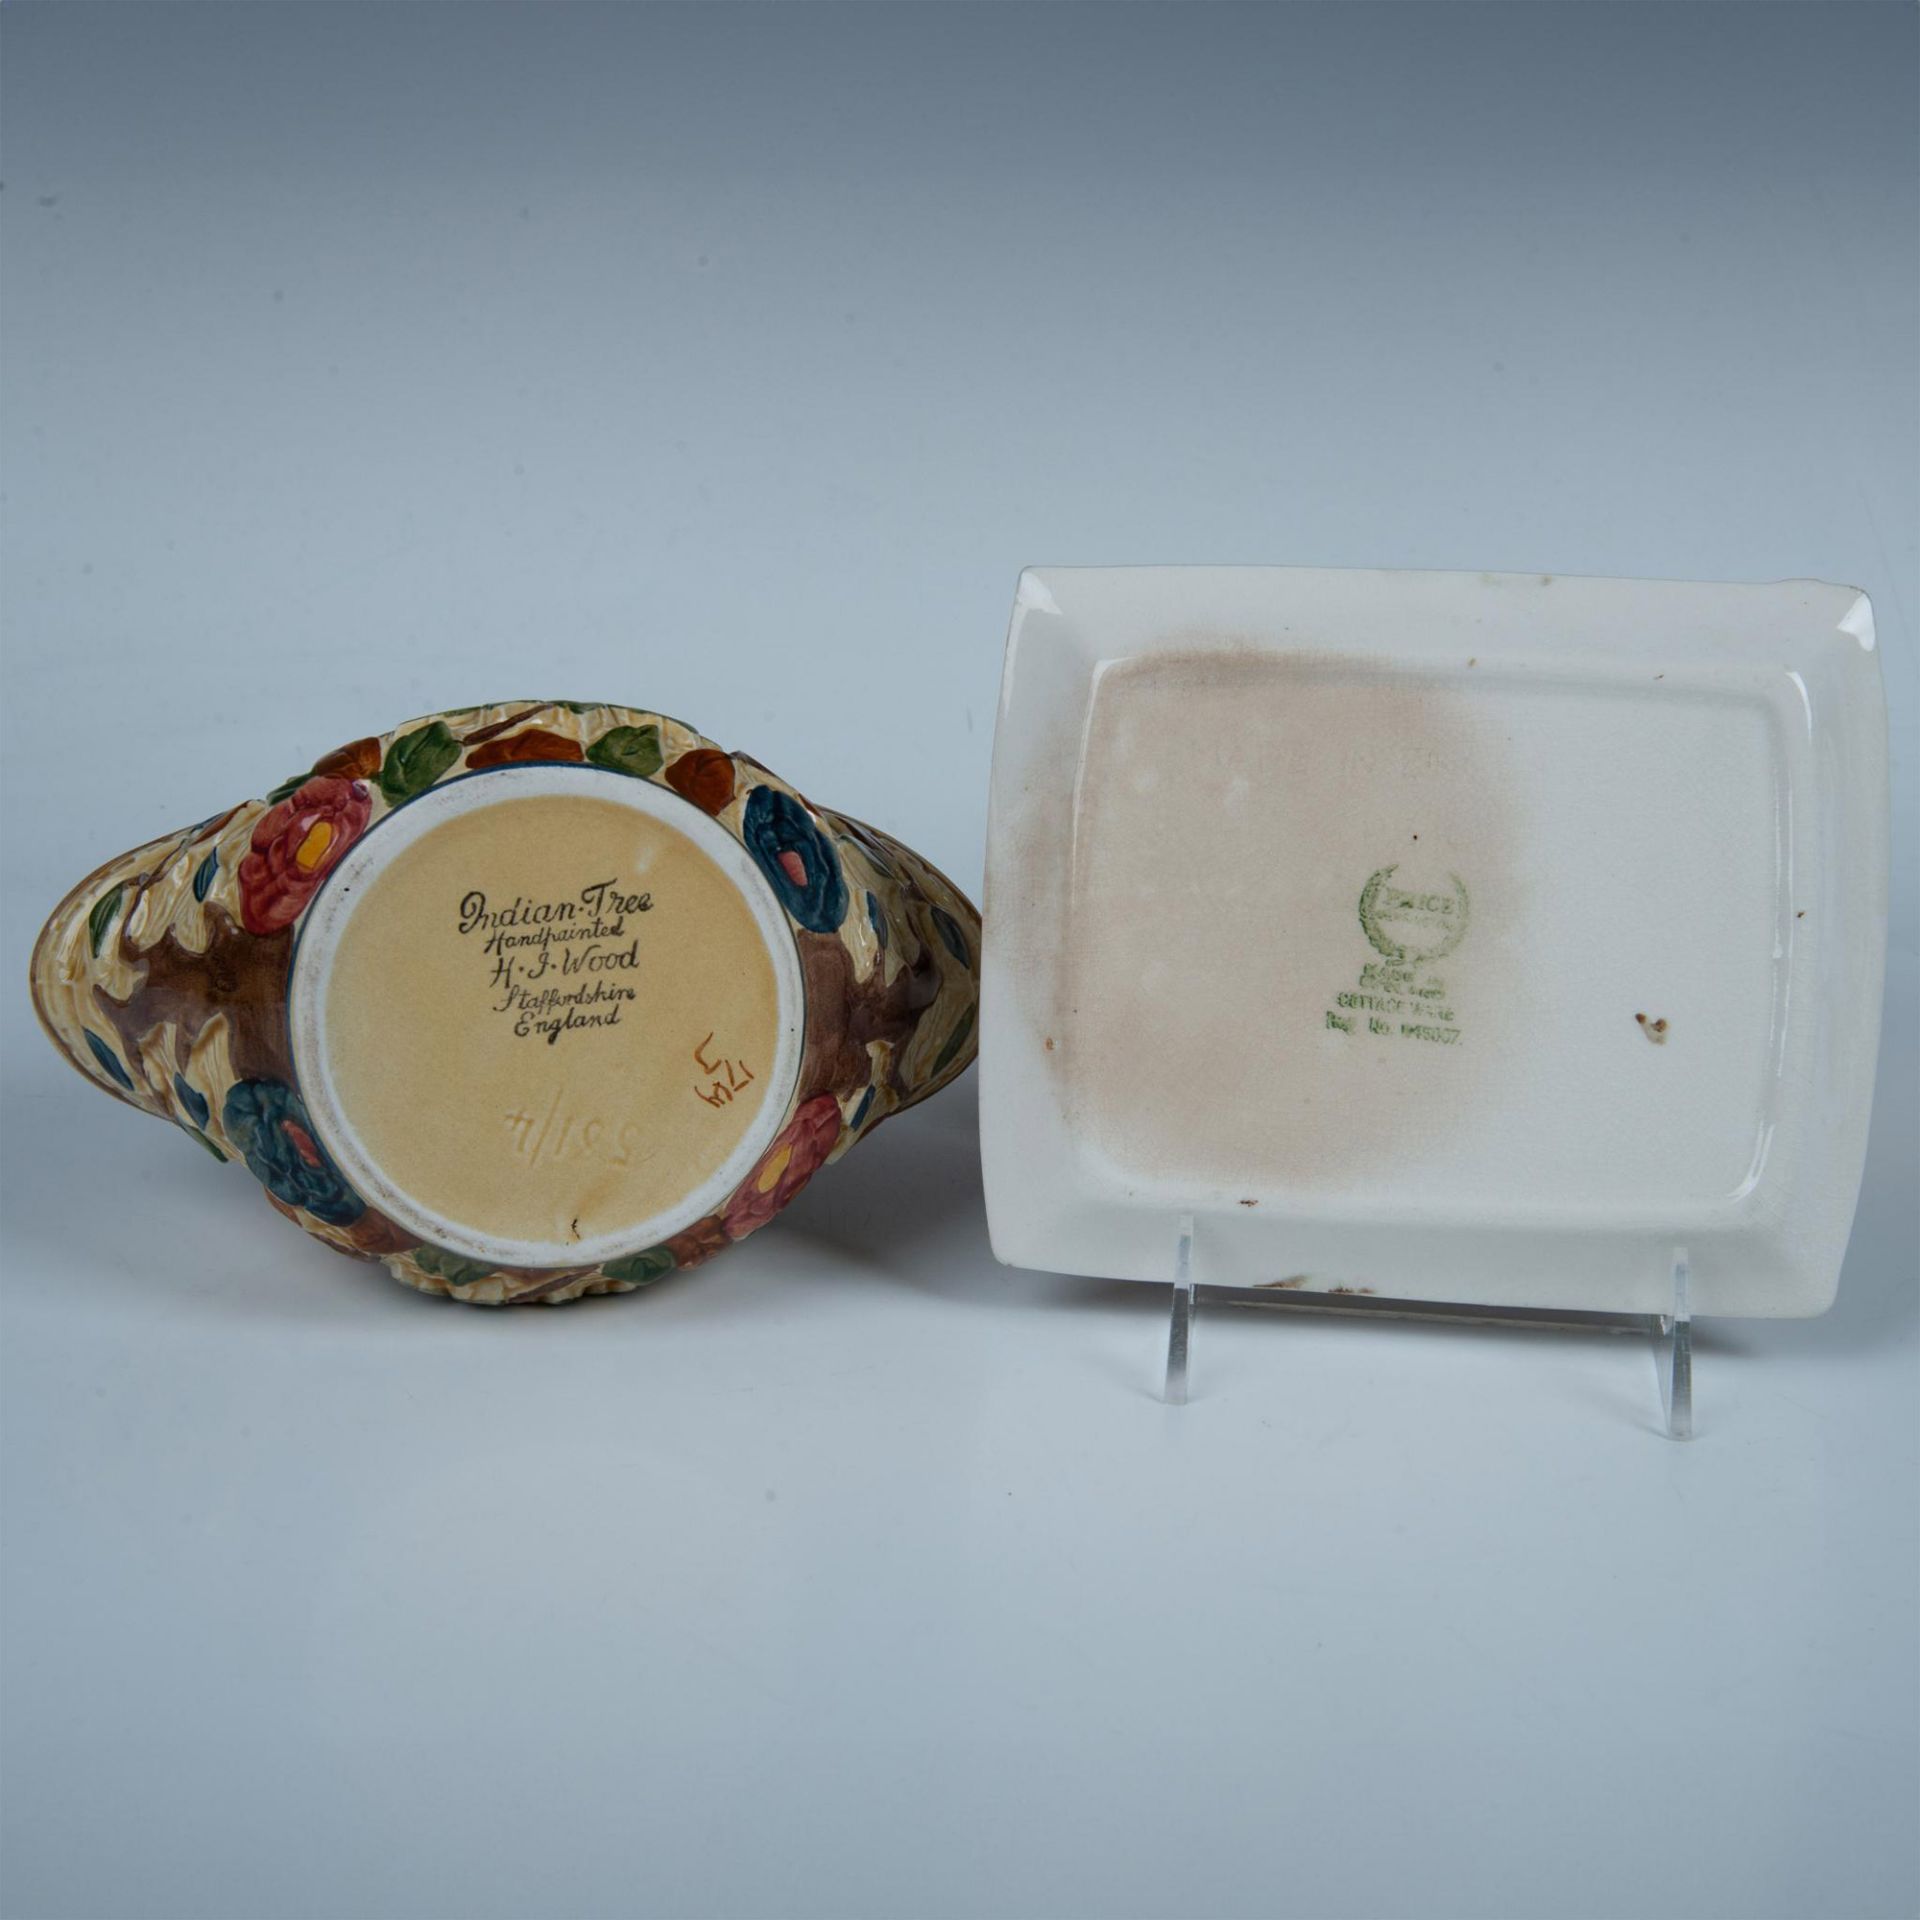 2pc English Pottery Table Pieces, Price & H.J. Wood - Image 6 of 8